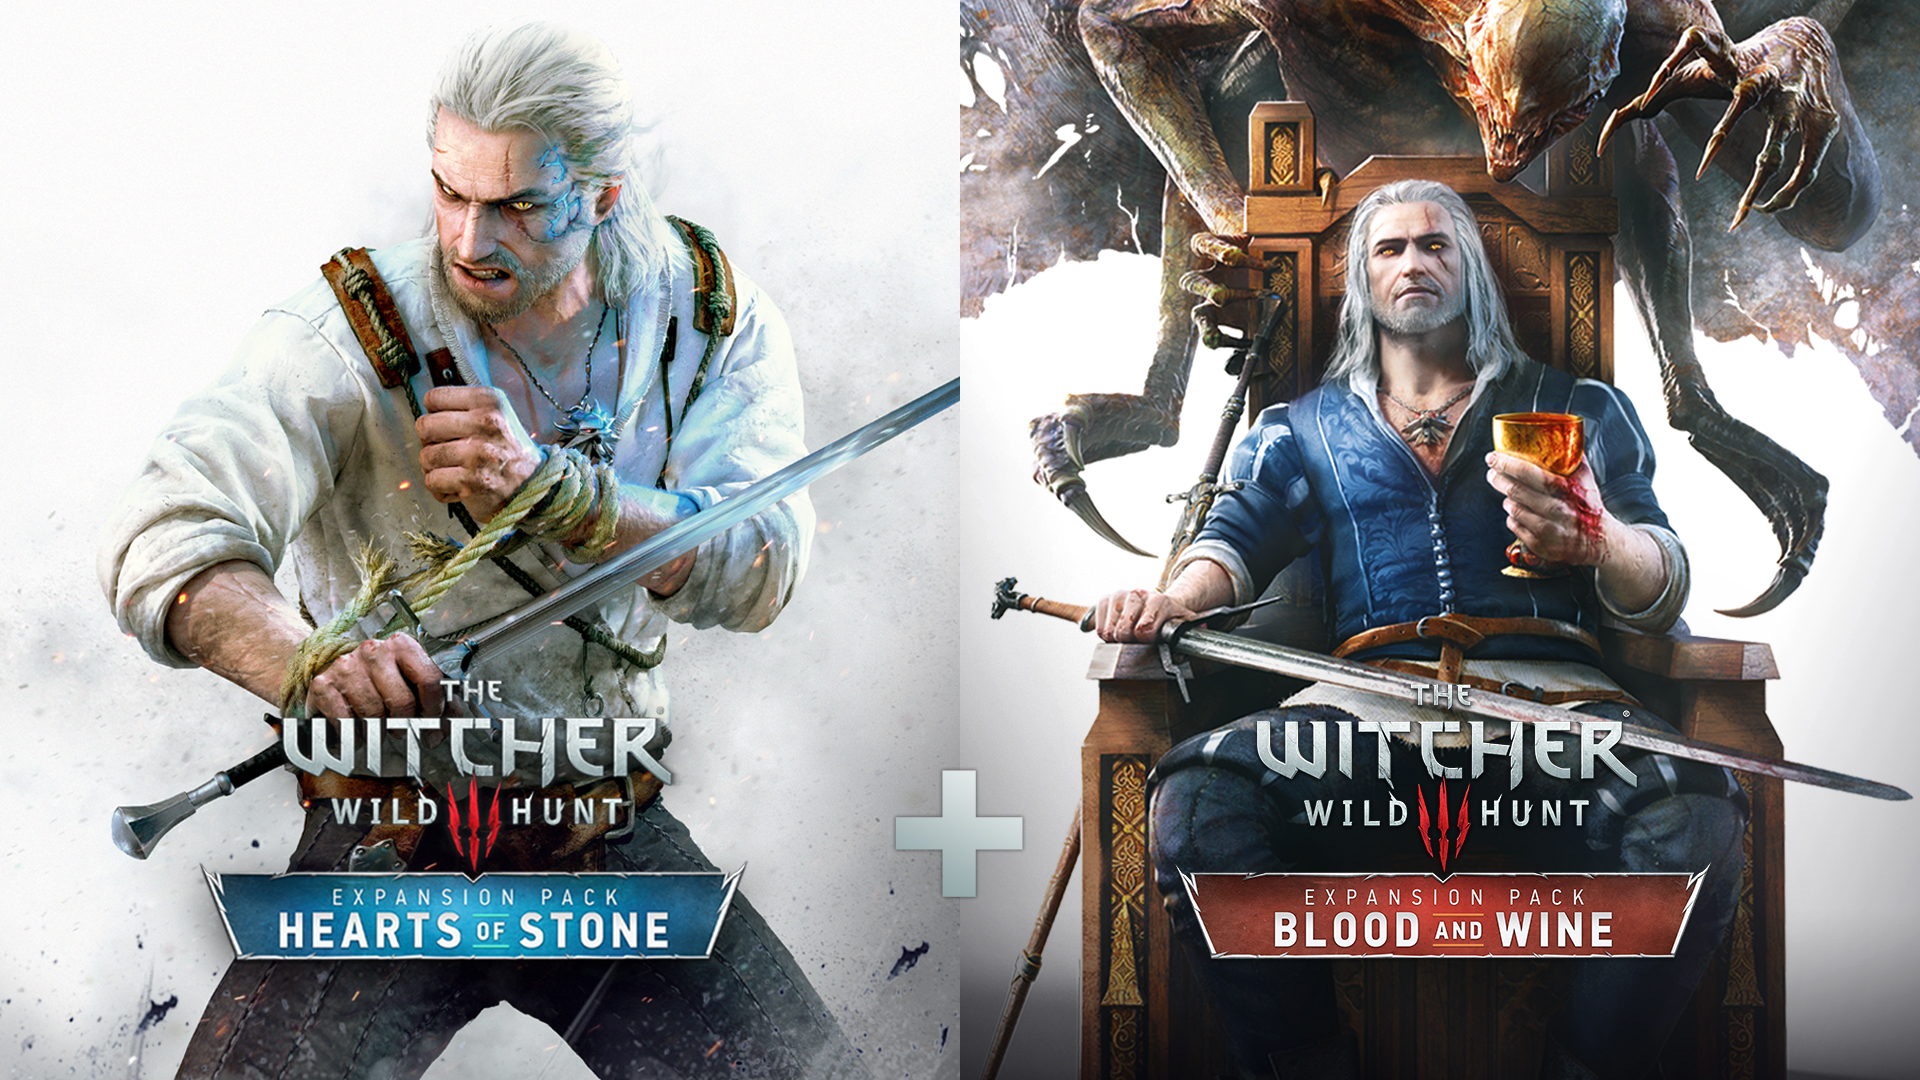 the witcher 3 wild hunt - hearts of stone